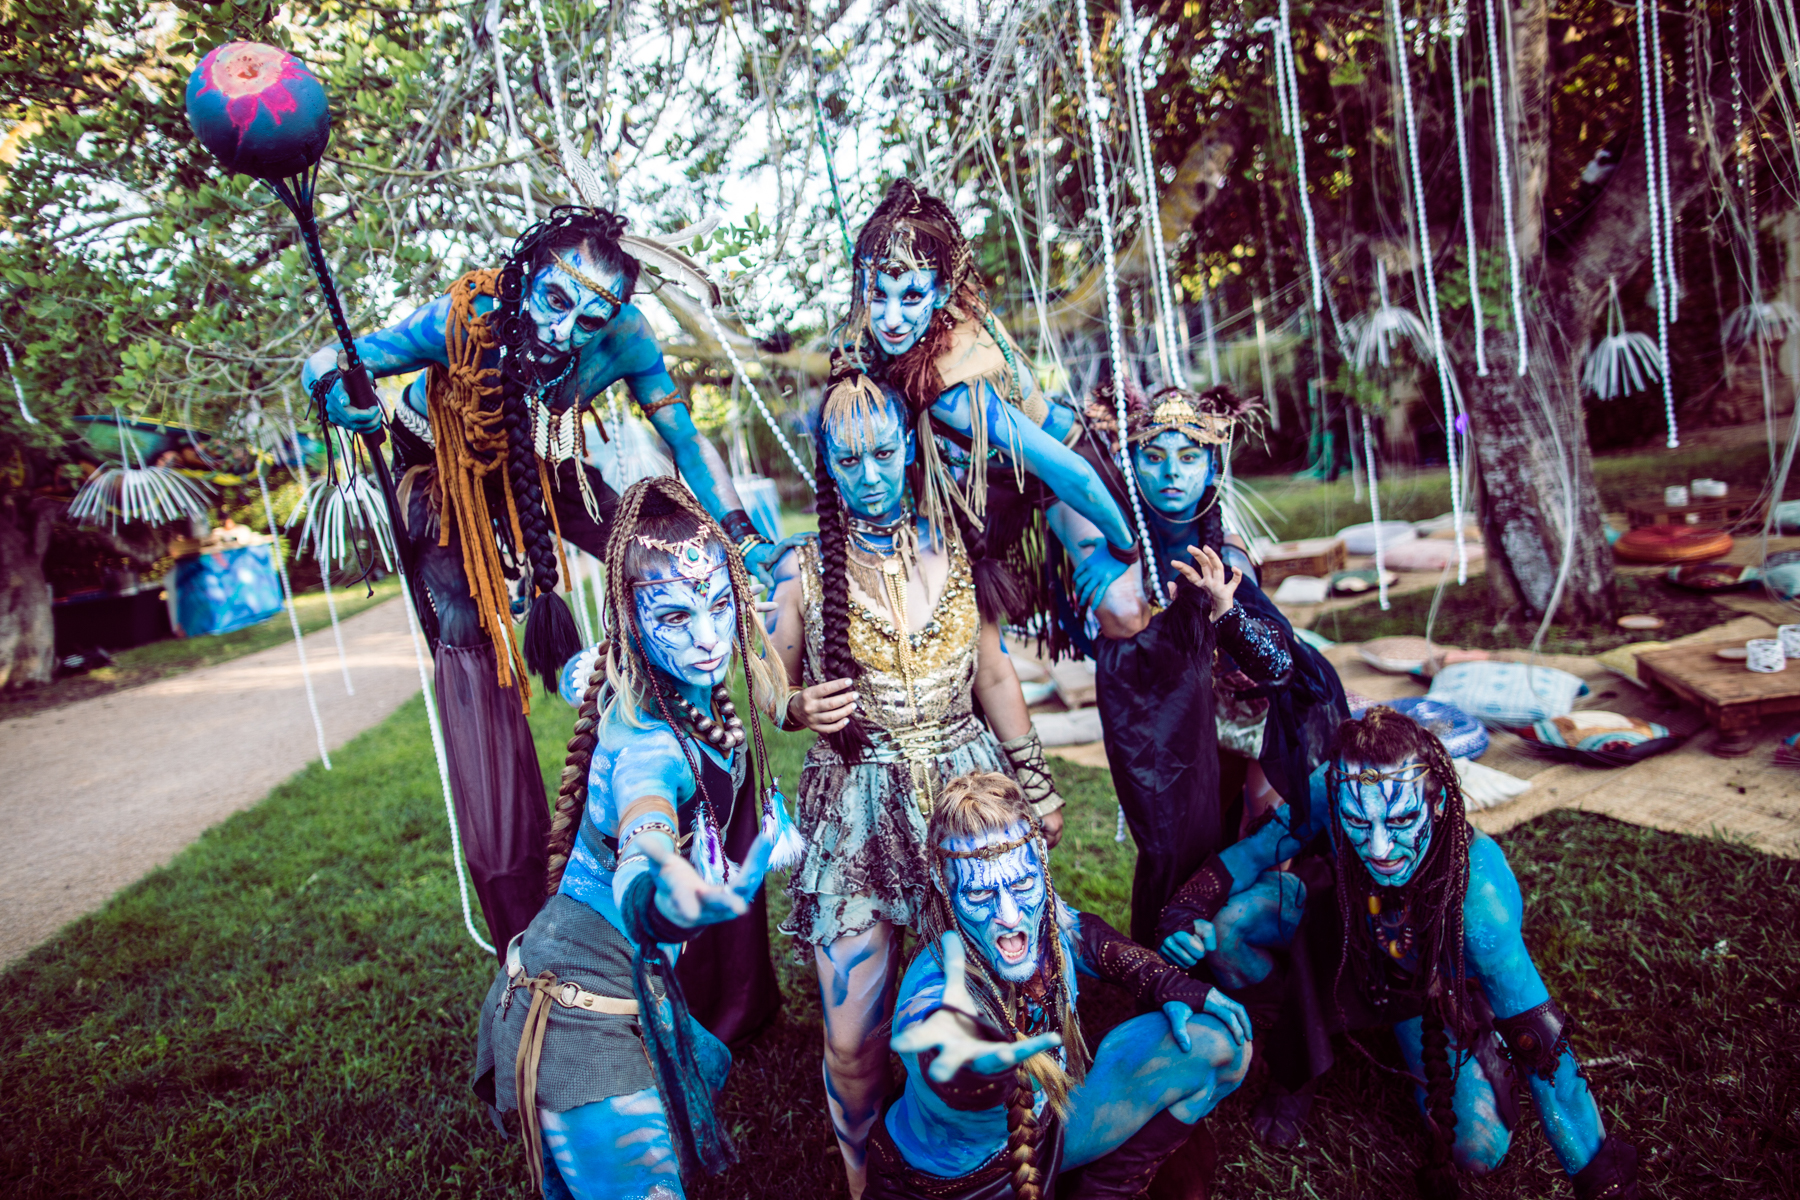 REVIEW AVATAR The Experience at Gardens by the Bay Singapore